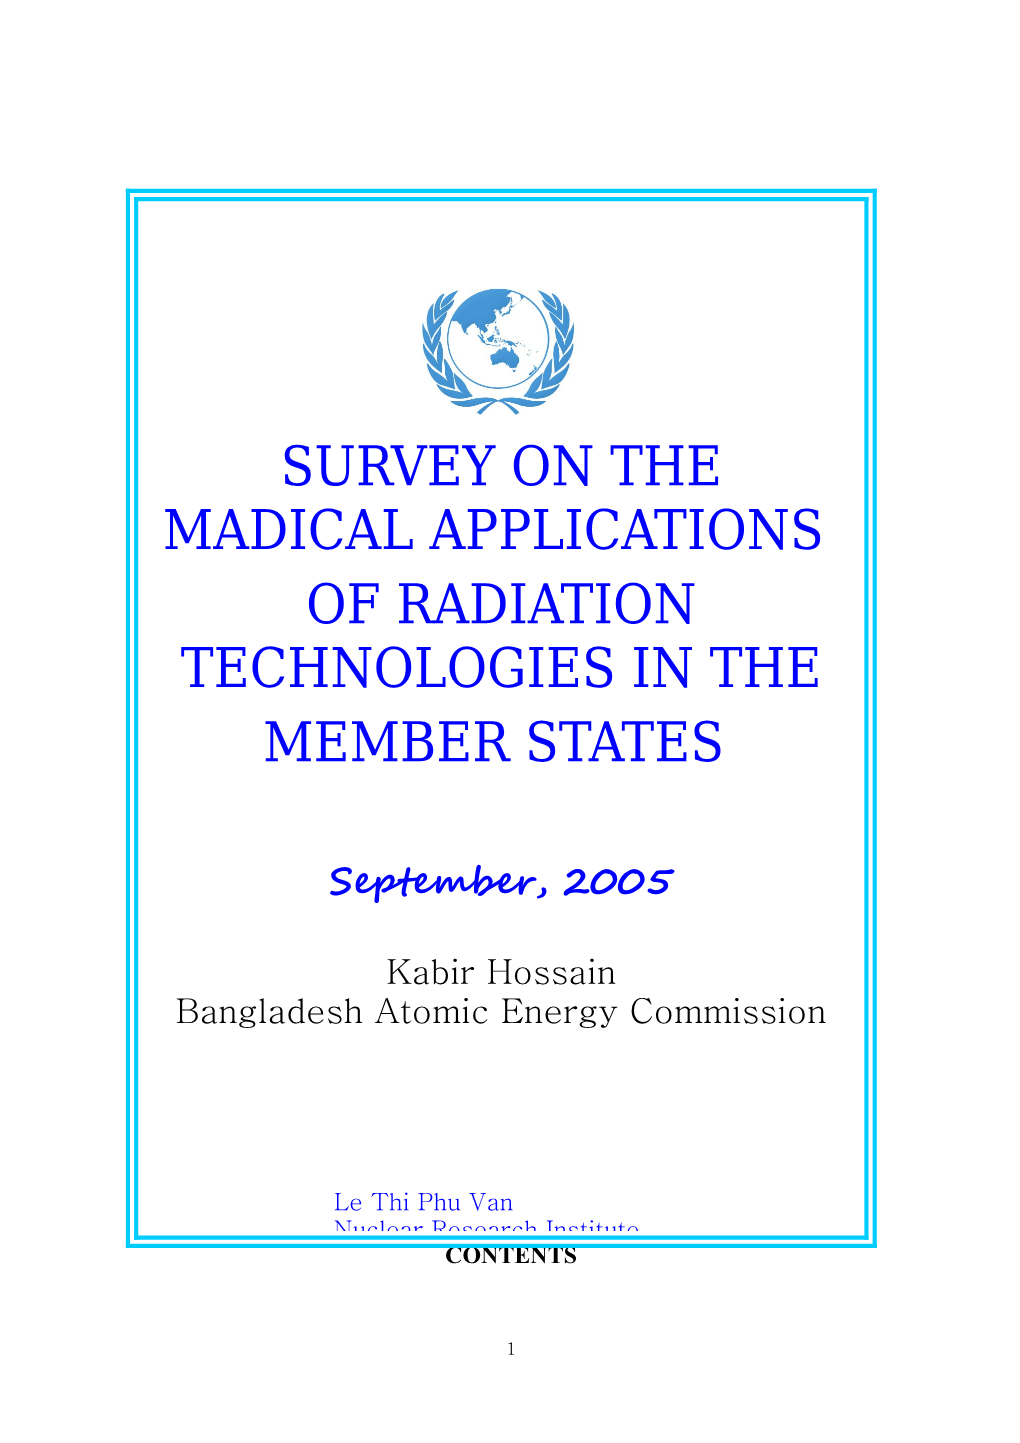 Suervey Results of the Status of the Medical Applications of Radiation Technologies In